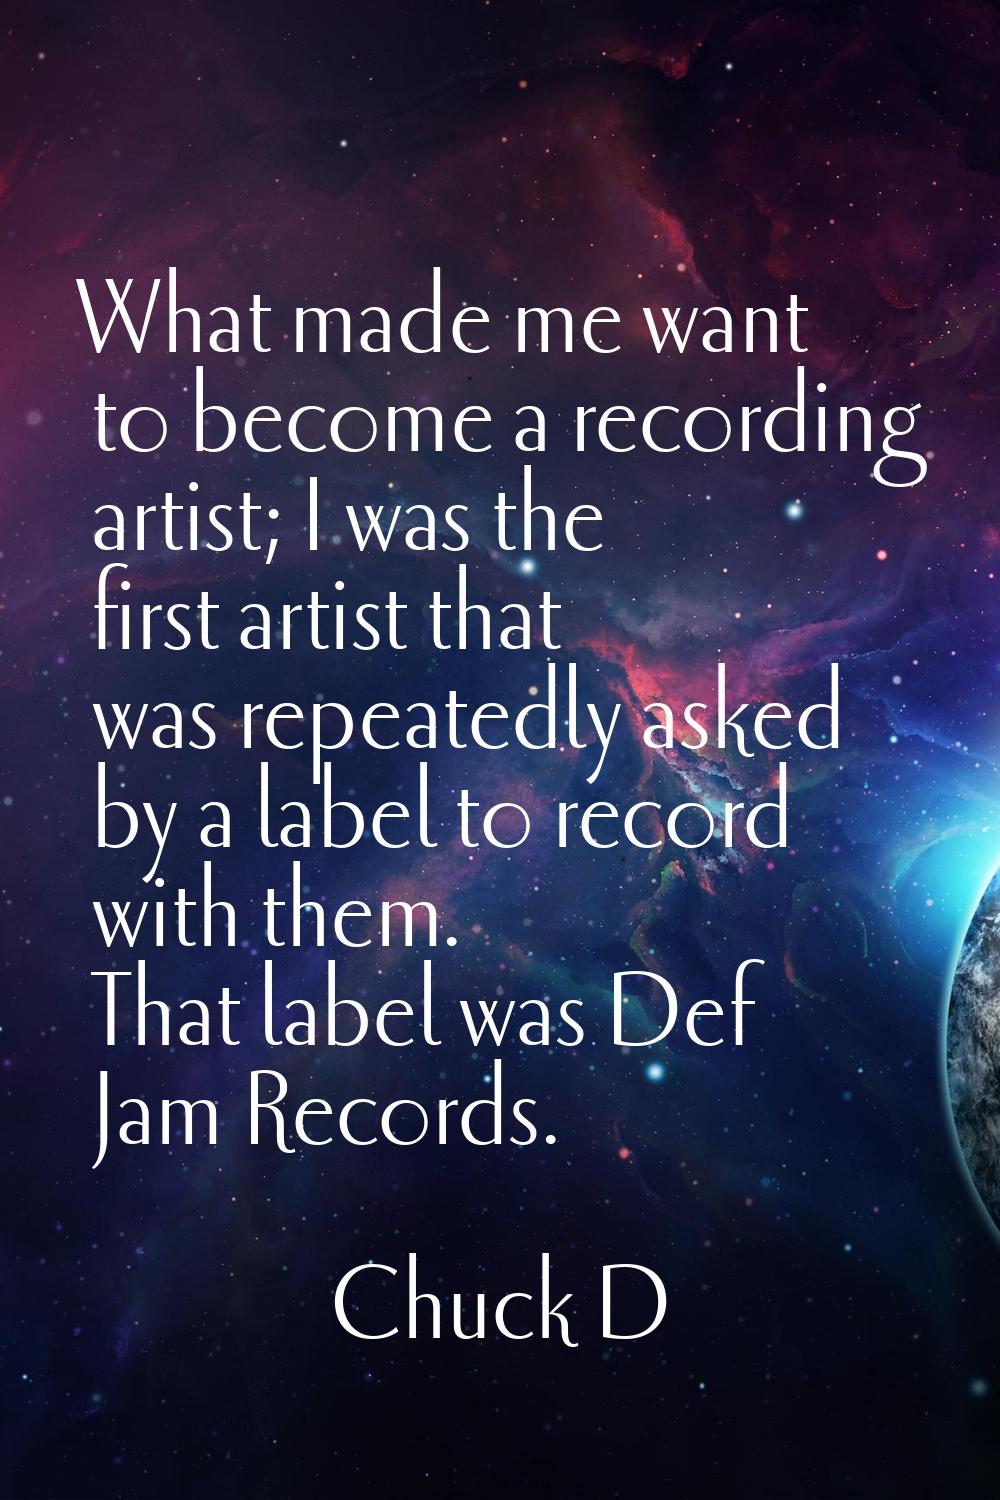 What made me want to become a recording artist; I was the first artist that was repeatedly asked by